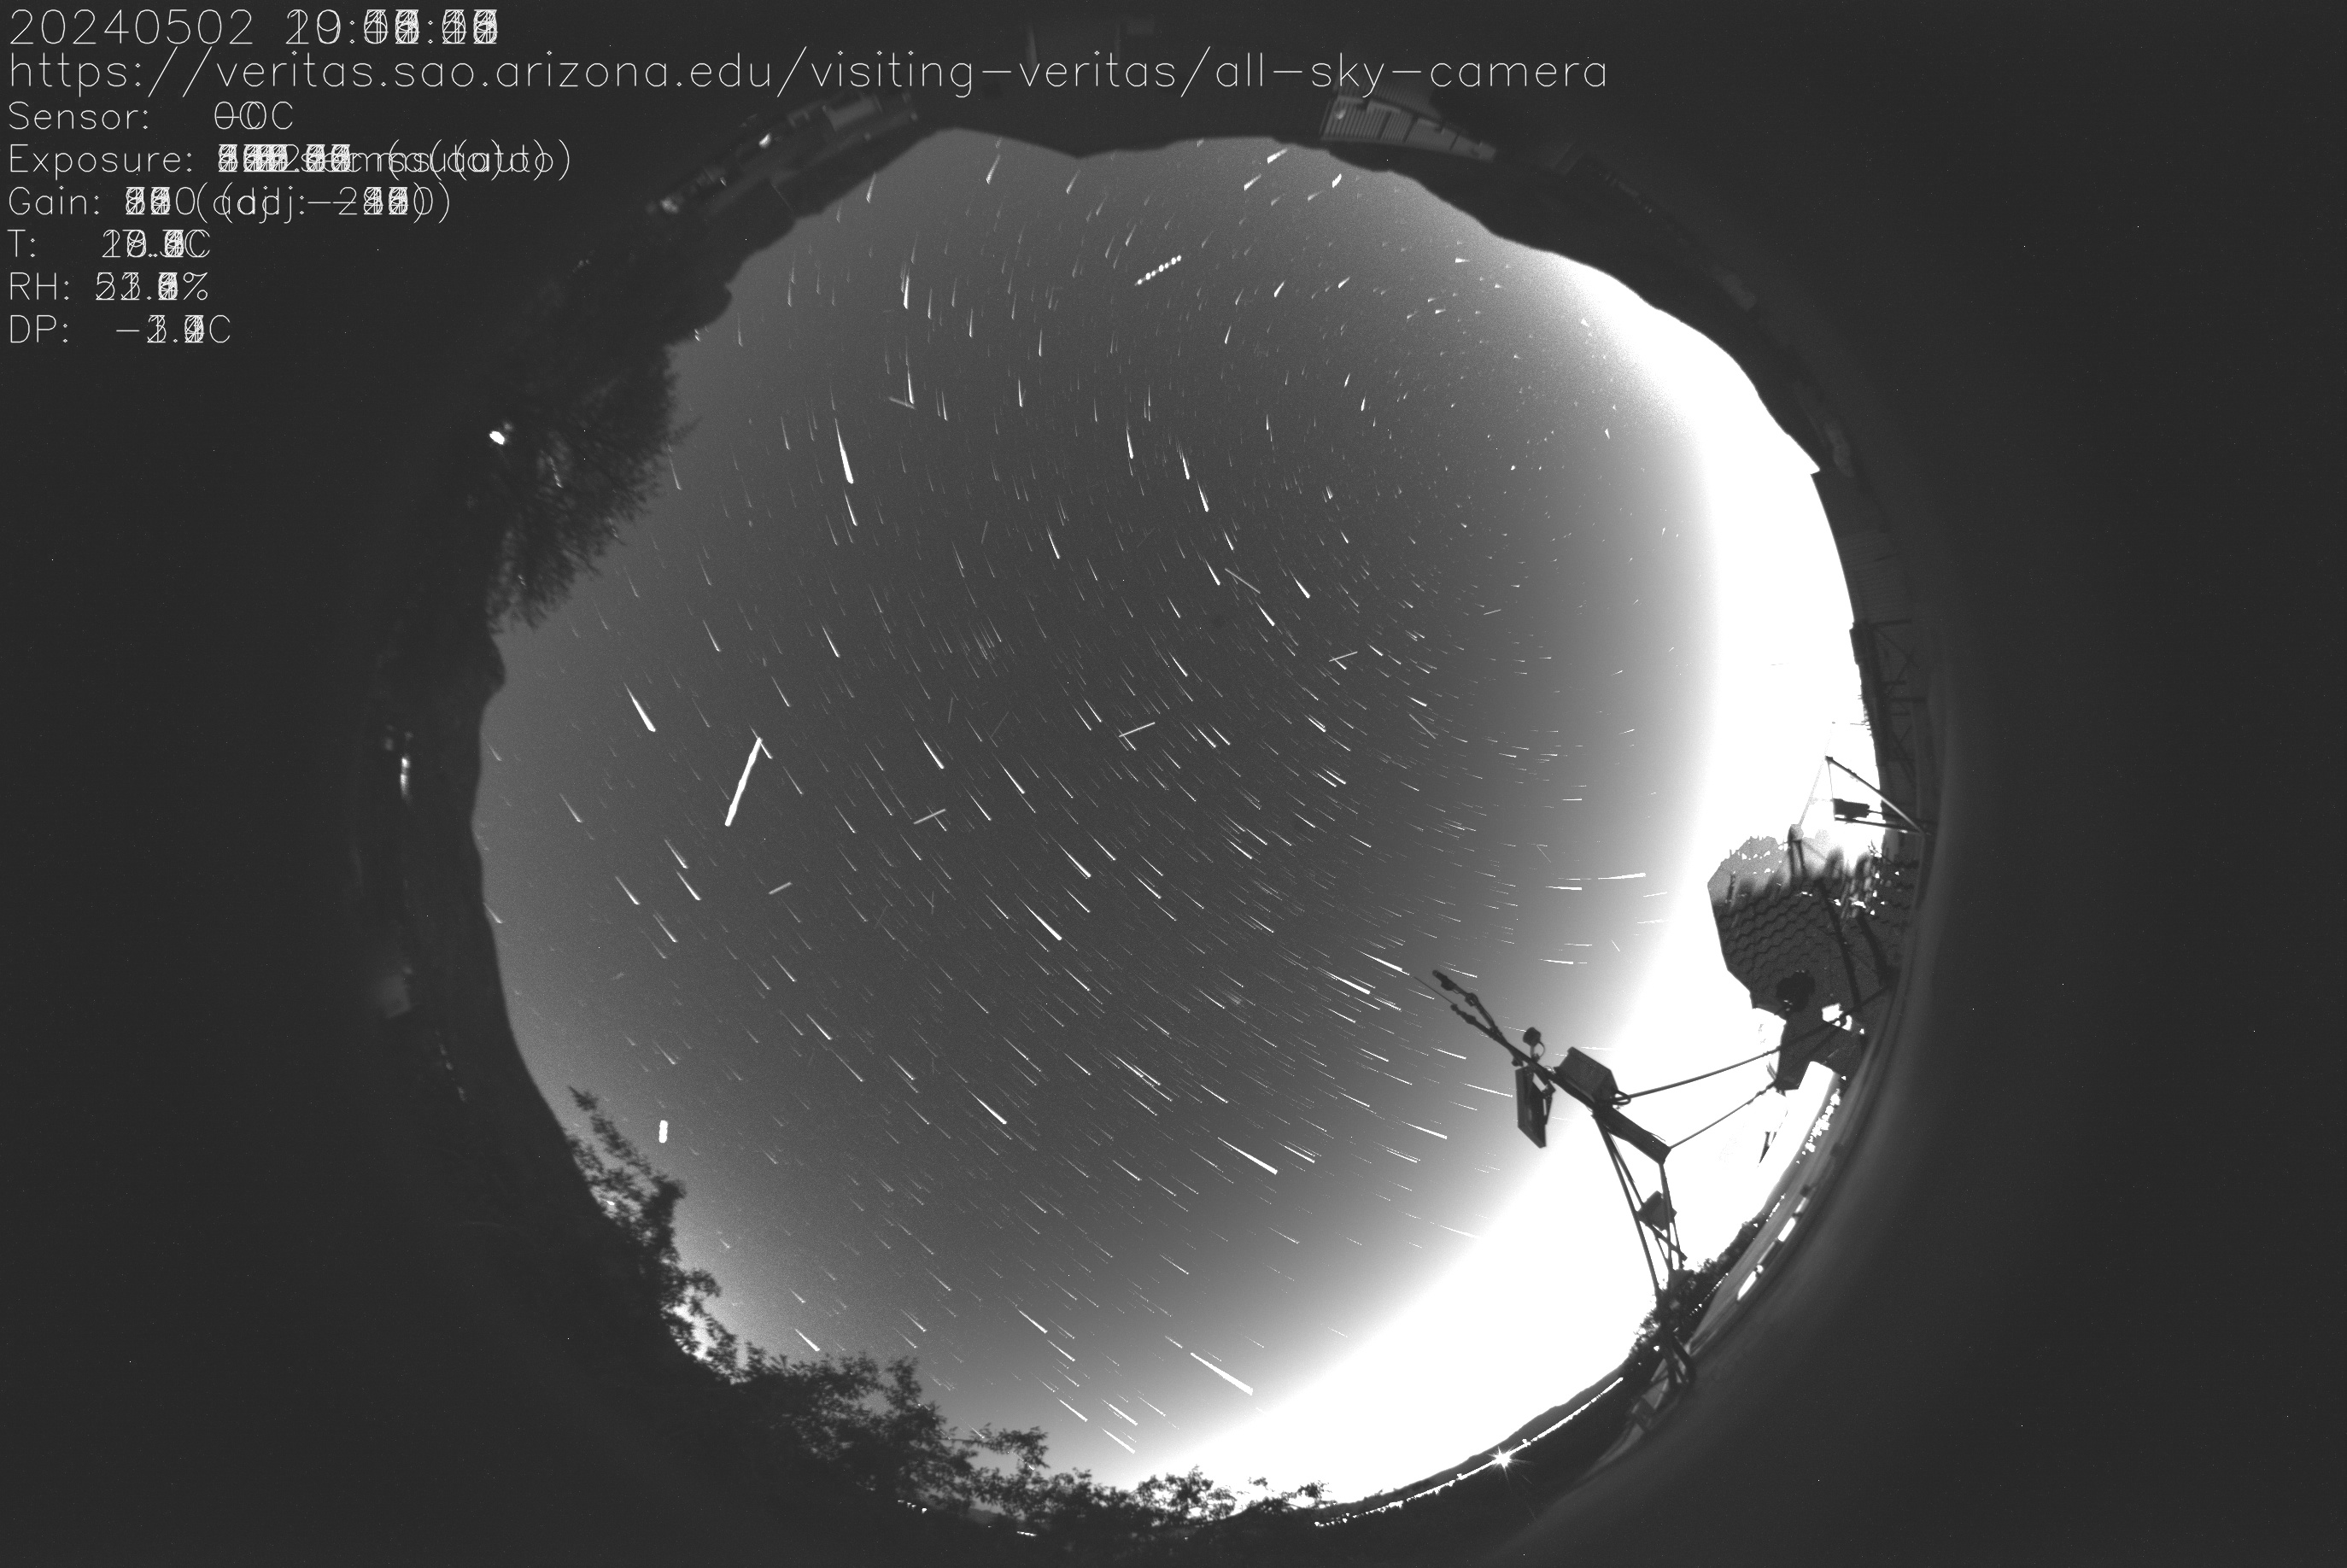 Previous night's star trails image